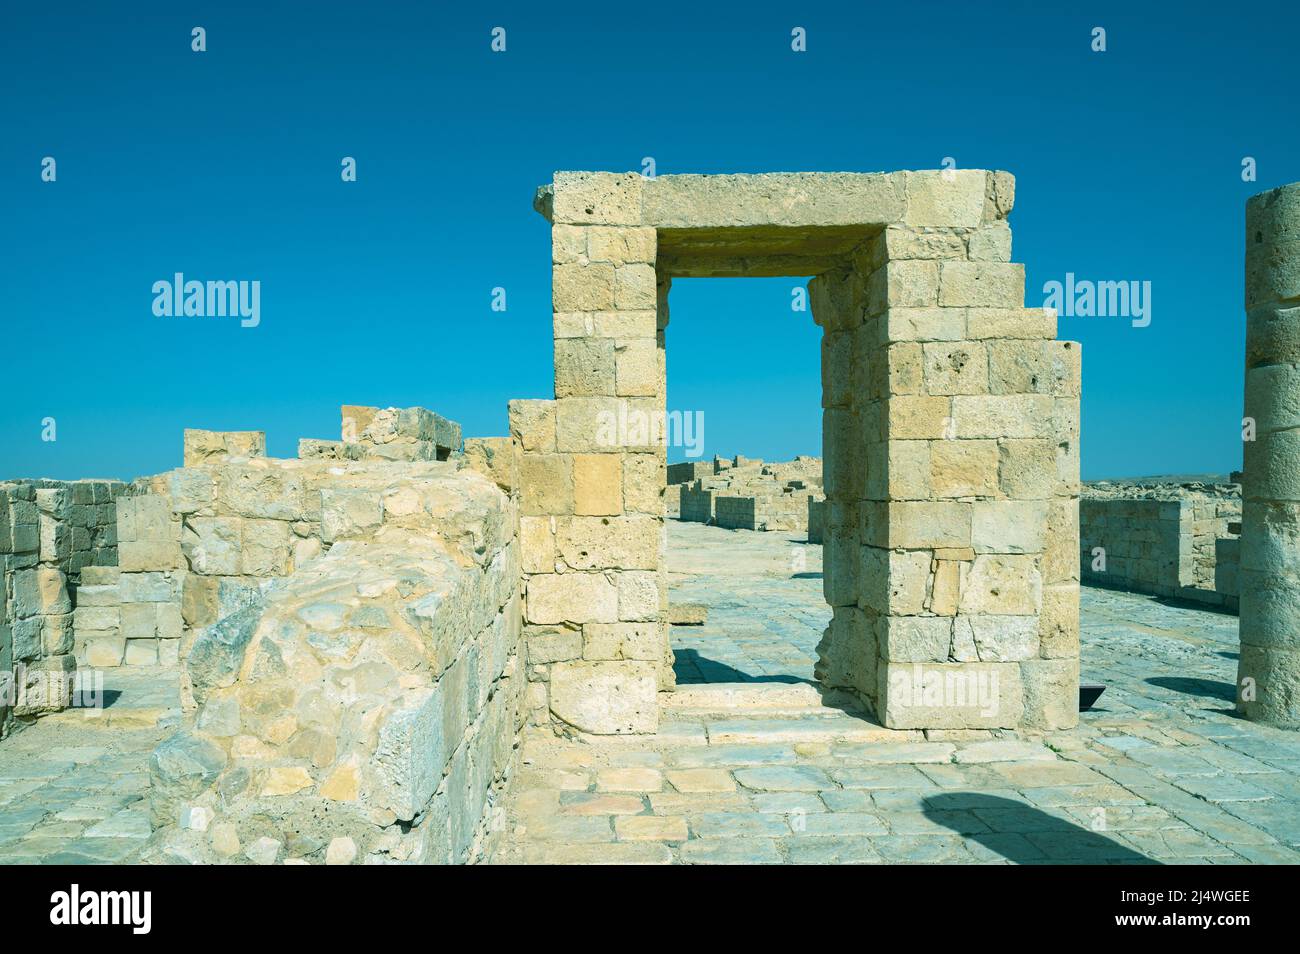 View of the ruined buildings in the ancient Nabataean city of Avdat, now a national Park, in the Negev Desert, Southern Israel Stock Photo